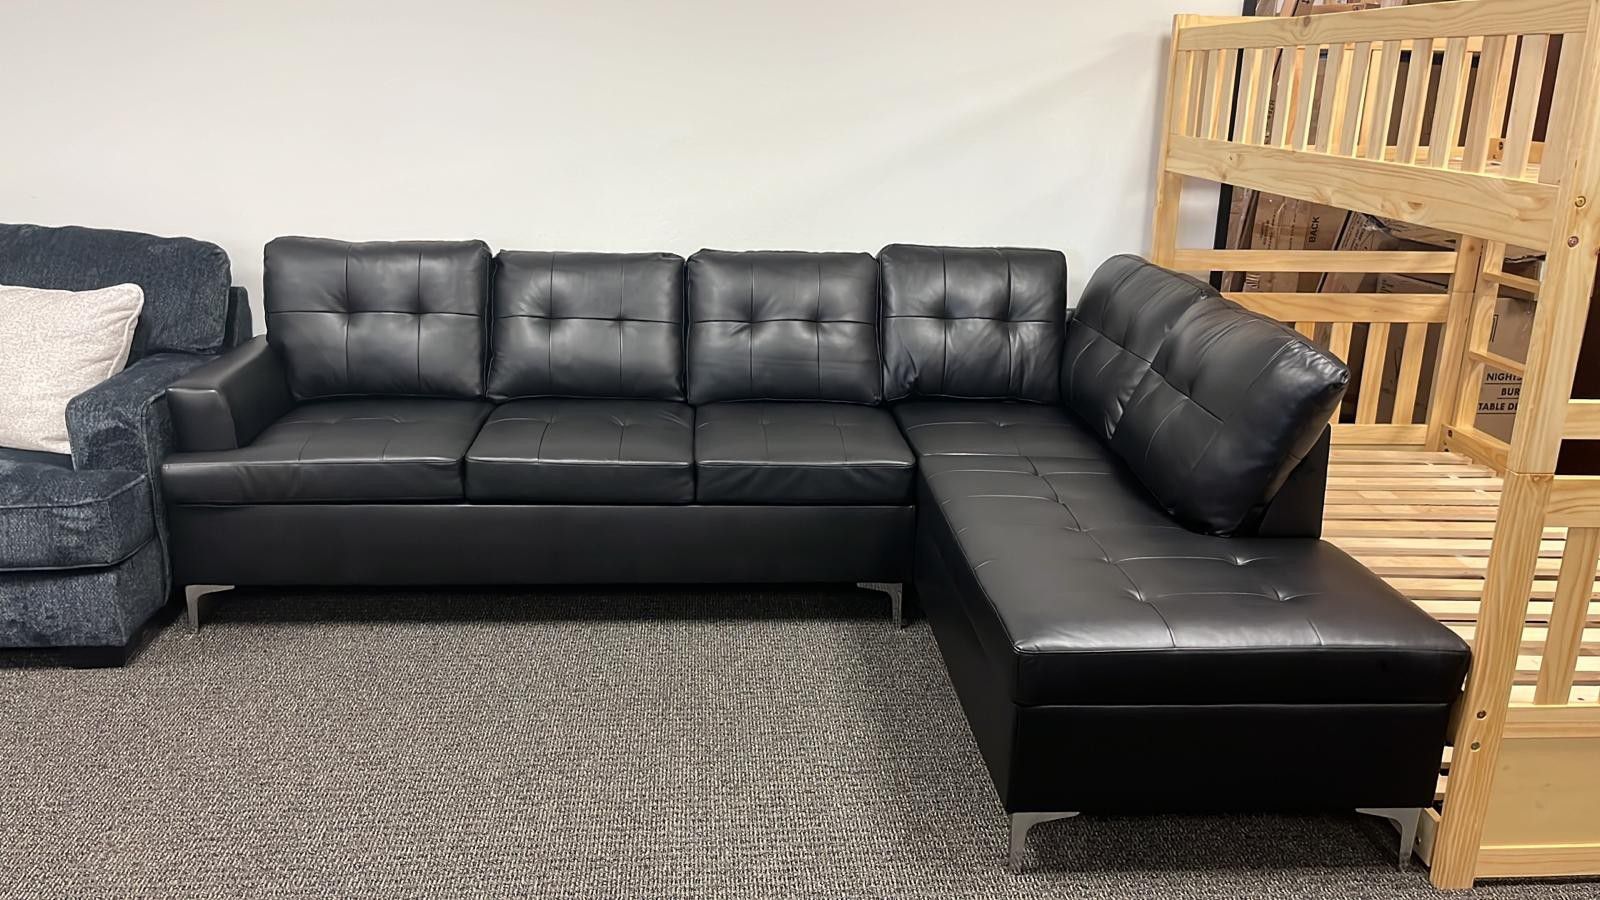 🛑🛑🛑 Brand New Vancouver Black Sectional L Shaped 